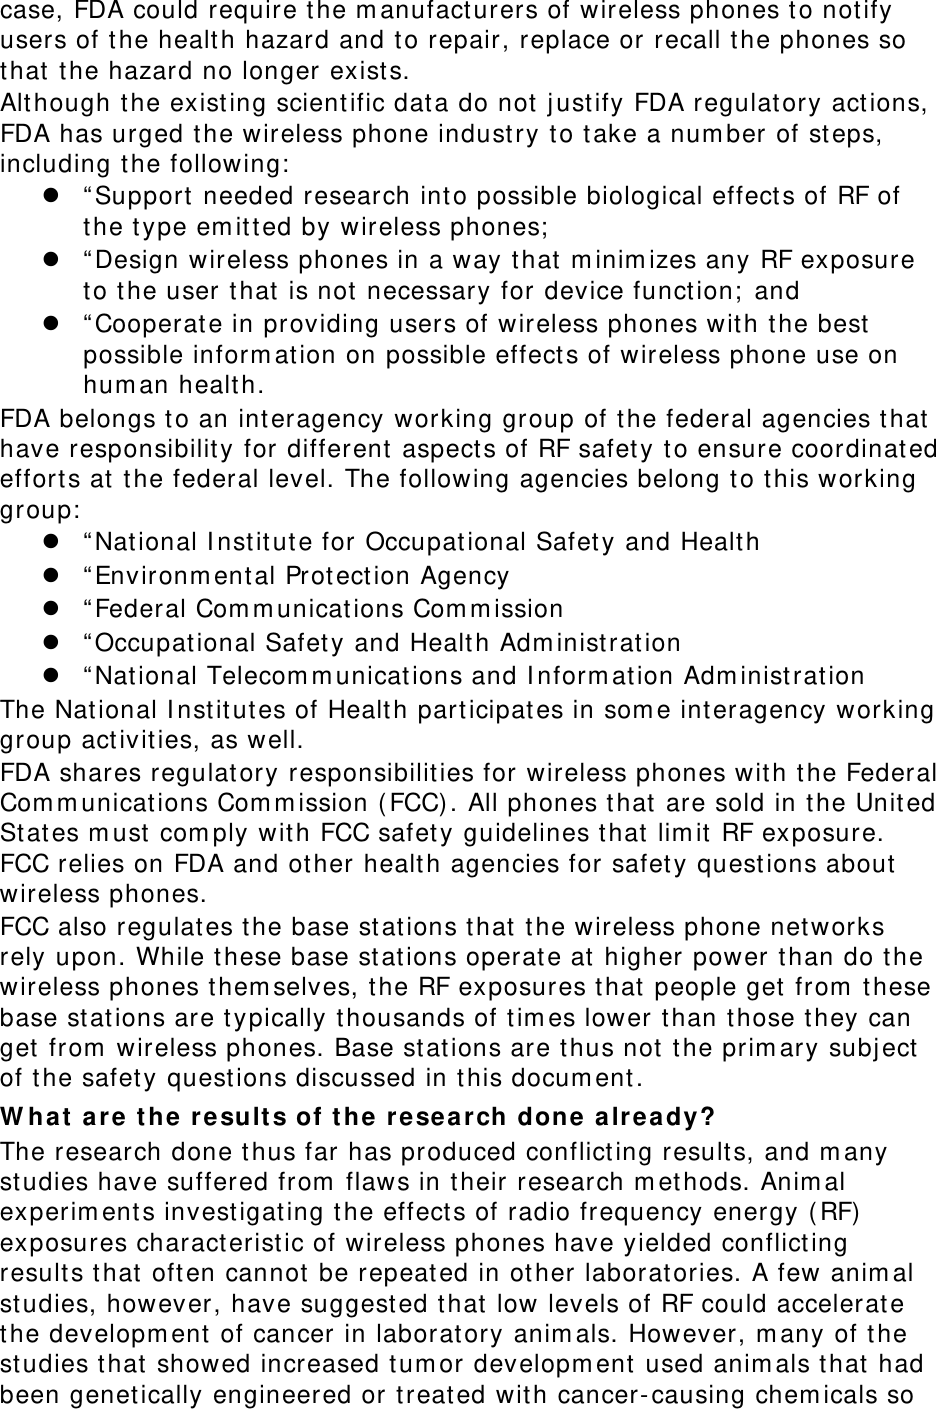 case, FDA could require the m anufact urers of wireless phones t o notify users of the health hazard and t o repair, replace or recall the phones so that t he hazard no longer exist s. Alt hough the existing scient ific data do not j ust ify FDA regulat ory act ions, FDA has urged t he wireless phone indust ry t o t ake a num ber of st eps, including t he following:  z “ Support  needed research into possible biological effect s of RF of the type em it t ed by wireless phones;  z “ Design wireless phones in a way that m inim izes any RF exposure to the user t hat  is not necessary for device function;  and z “ Cooperate in providing users of wireless phones with t he best  possible inform ation on possible effect s of wireless phone use on hum an healt h. FDA belongs to an int eragency working group of the federal agencies t hat have responsibilit y for different  aspect s of RF safet y to ensure coordinated efforts at the federal level. The following agencies belong to t his working group:  z “ National I nst itut e for Occupat ional Safety and Healt h z “ Environm ental Prot ect ion Agency z “ Federal Com m unicat ions Com m ission z “ Occupat ional Safet y and Health Adm inist ration z “ National Telecom m unications and I nform ation Adm inist ration The National I nst itut es of Health part icipates in som e int eragency working group act ivities, as well. FDA shares regulat ory responsibilities for wireless phones with t he Federal Com m unicat ions Com m ission ( FCC). All phones t hat  are sold in t he United St ates m ust com ply with FCC safet y guidelines t hat lim it RF exposure. FCC relies on FDA and other health agencies for safet y quest ions about wireless phones. FCC also regulat es the base stat ions t hat  the wireless phone networks rely upon. While t hese base st at ions operat e at higher power than do the wireless phones them selves, t he RF exposures that people get  from  t hese base stat ions are typically thousands of tim es lower t han those t hey can get  from  wireless phones. Base stat ions are t hus not t he prim ary subj ect  of t he safet y quest ions discussed in t his docum ent. W hat are  t he r e sult s of t he r esearch done  a lrea dy? The research done thus far has produced conflict ing result s, and m any studies have suffered from  flaws in t heir research m et hods. Anim al experim ents invest igating the effect s of radio frequency energy ( RF)  exposures charact eristic of wireless phones have yielded conflict ing results t hat often cannot be repeated in ot her laboratories. A few anim al studies, however, have suggest ed t hat  low levels of RF could accelerate the developm ent  of cancer in laborat ory anim als. However, m any of the studies t hat showed increased t um or developm ent used anim als t hat had been genet ically engineered or t reat ed wit h cancer- causing chem icals so 